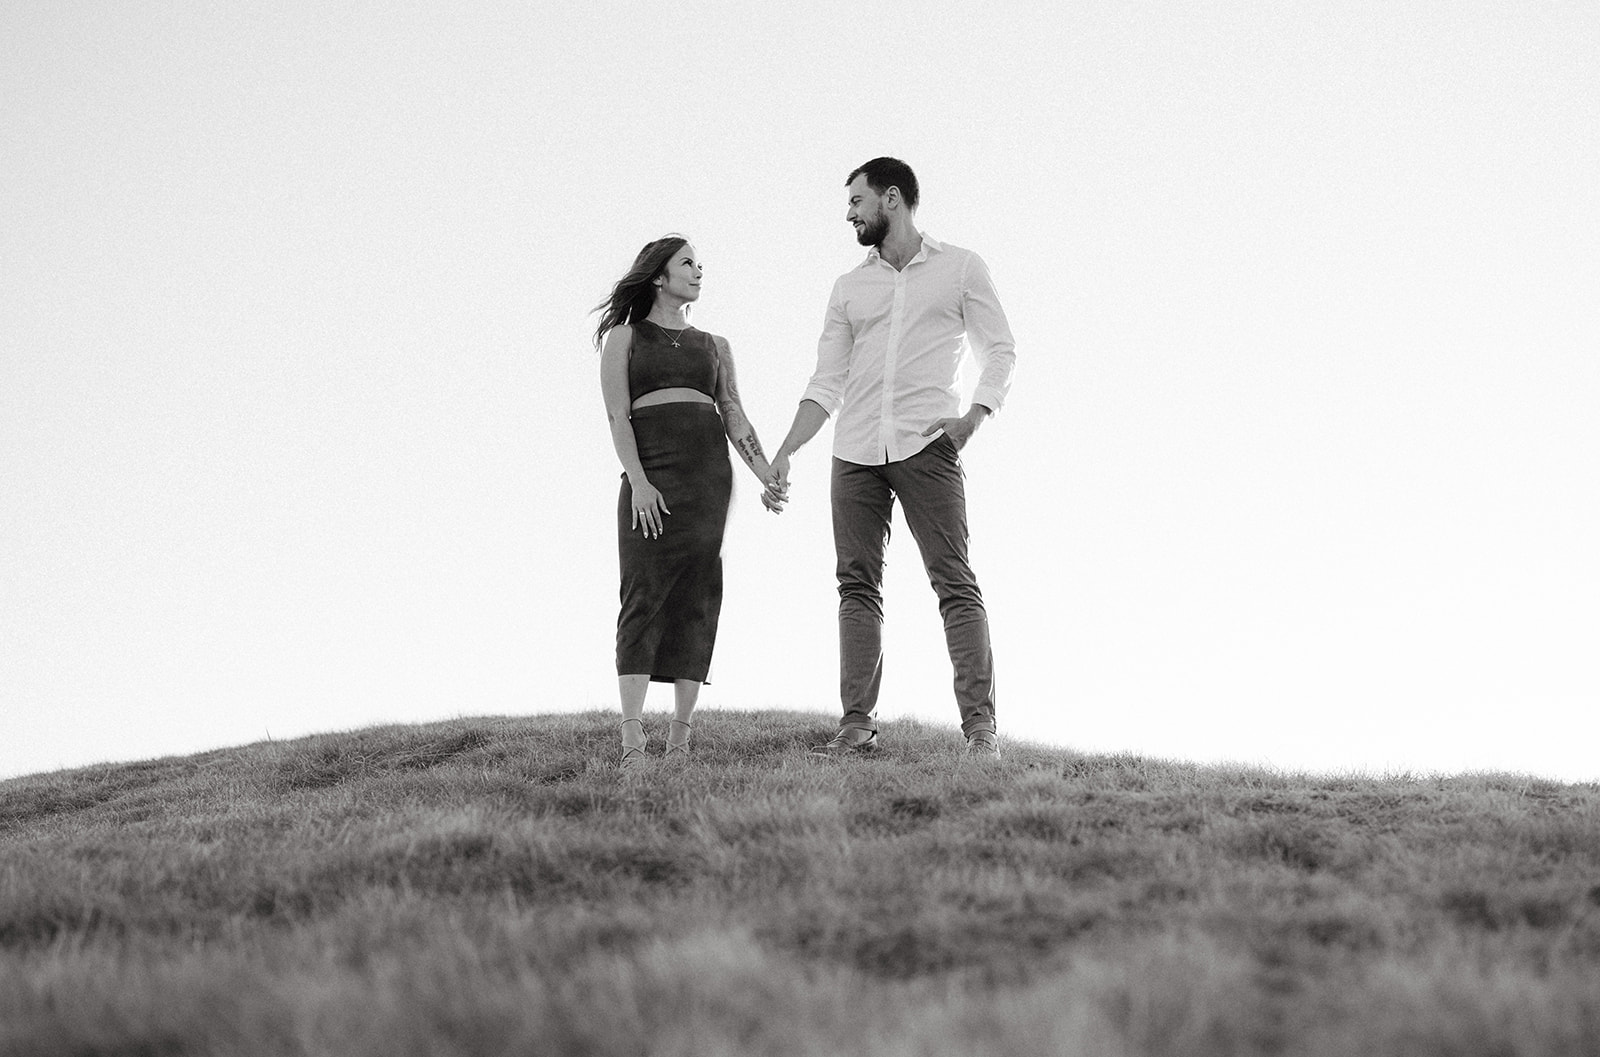 A couple holding hands on a grassy hill with a clear sky.